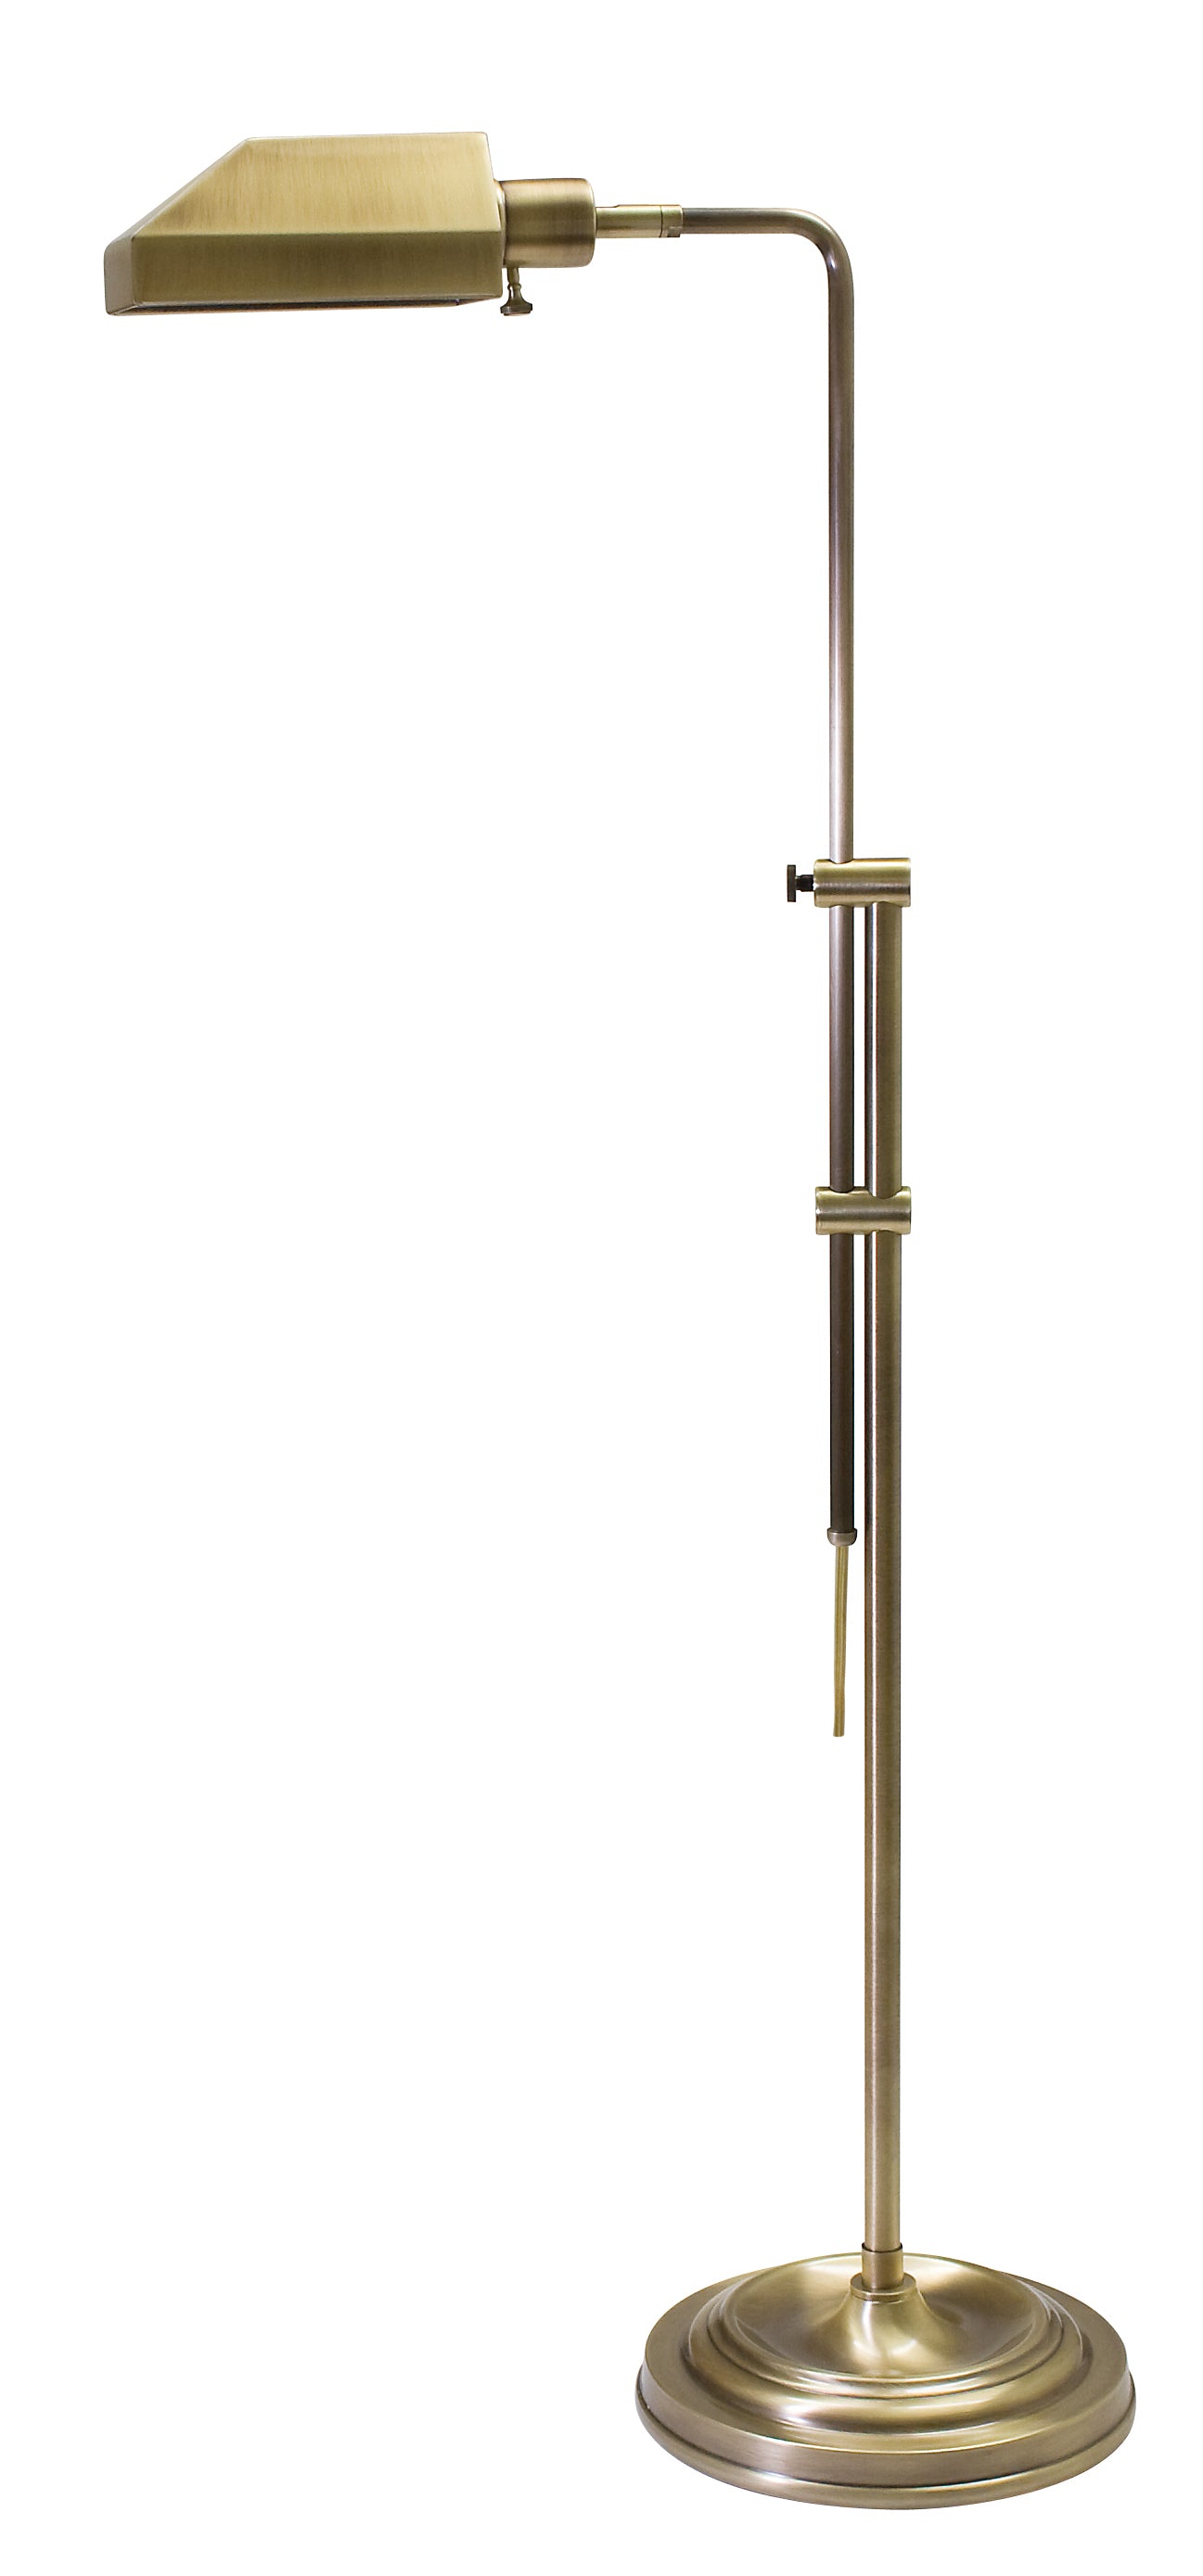 House of Troy Coach Adjustable Antique Brass Pharmacy Floor Lamp CH825-AB